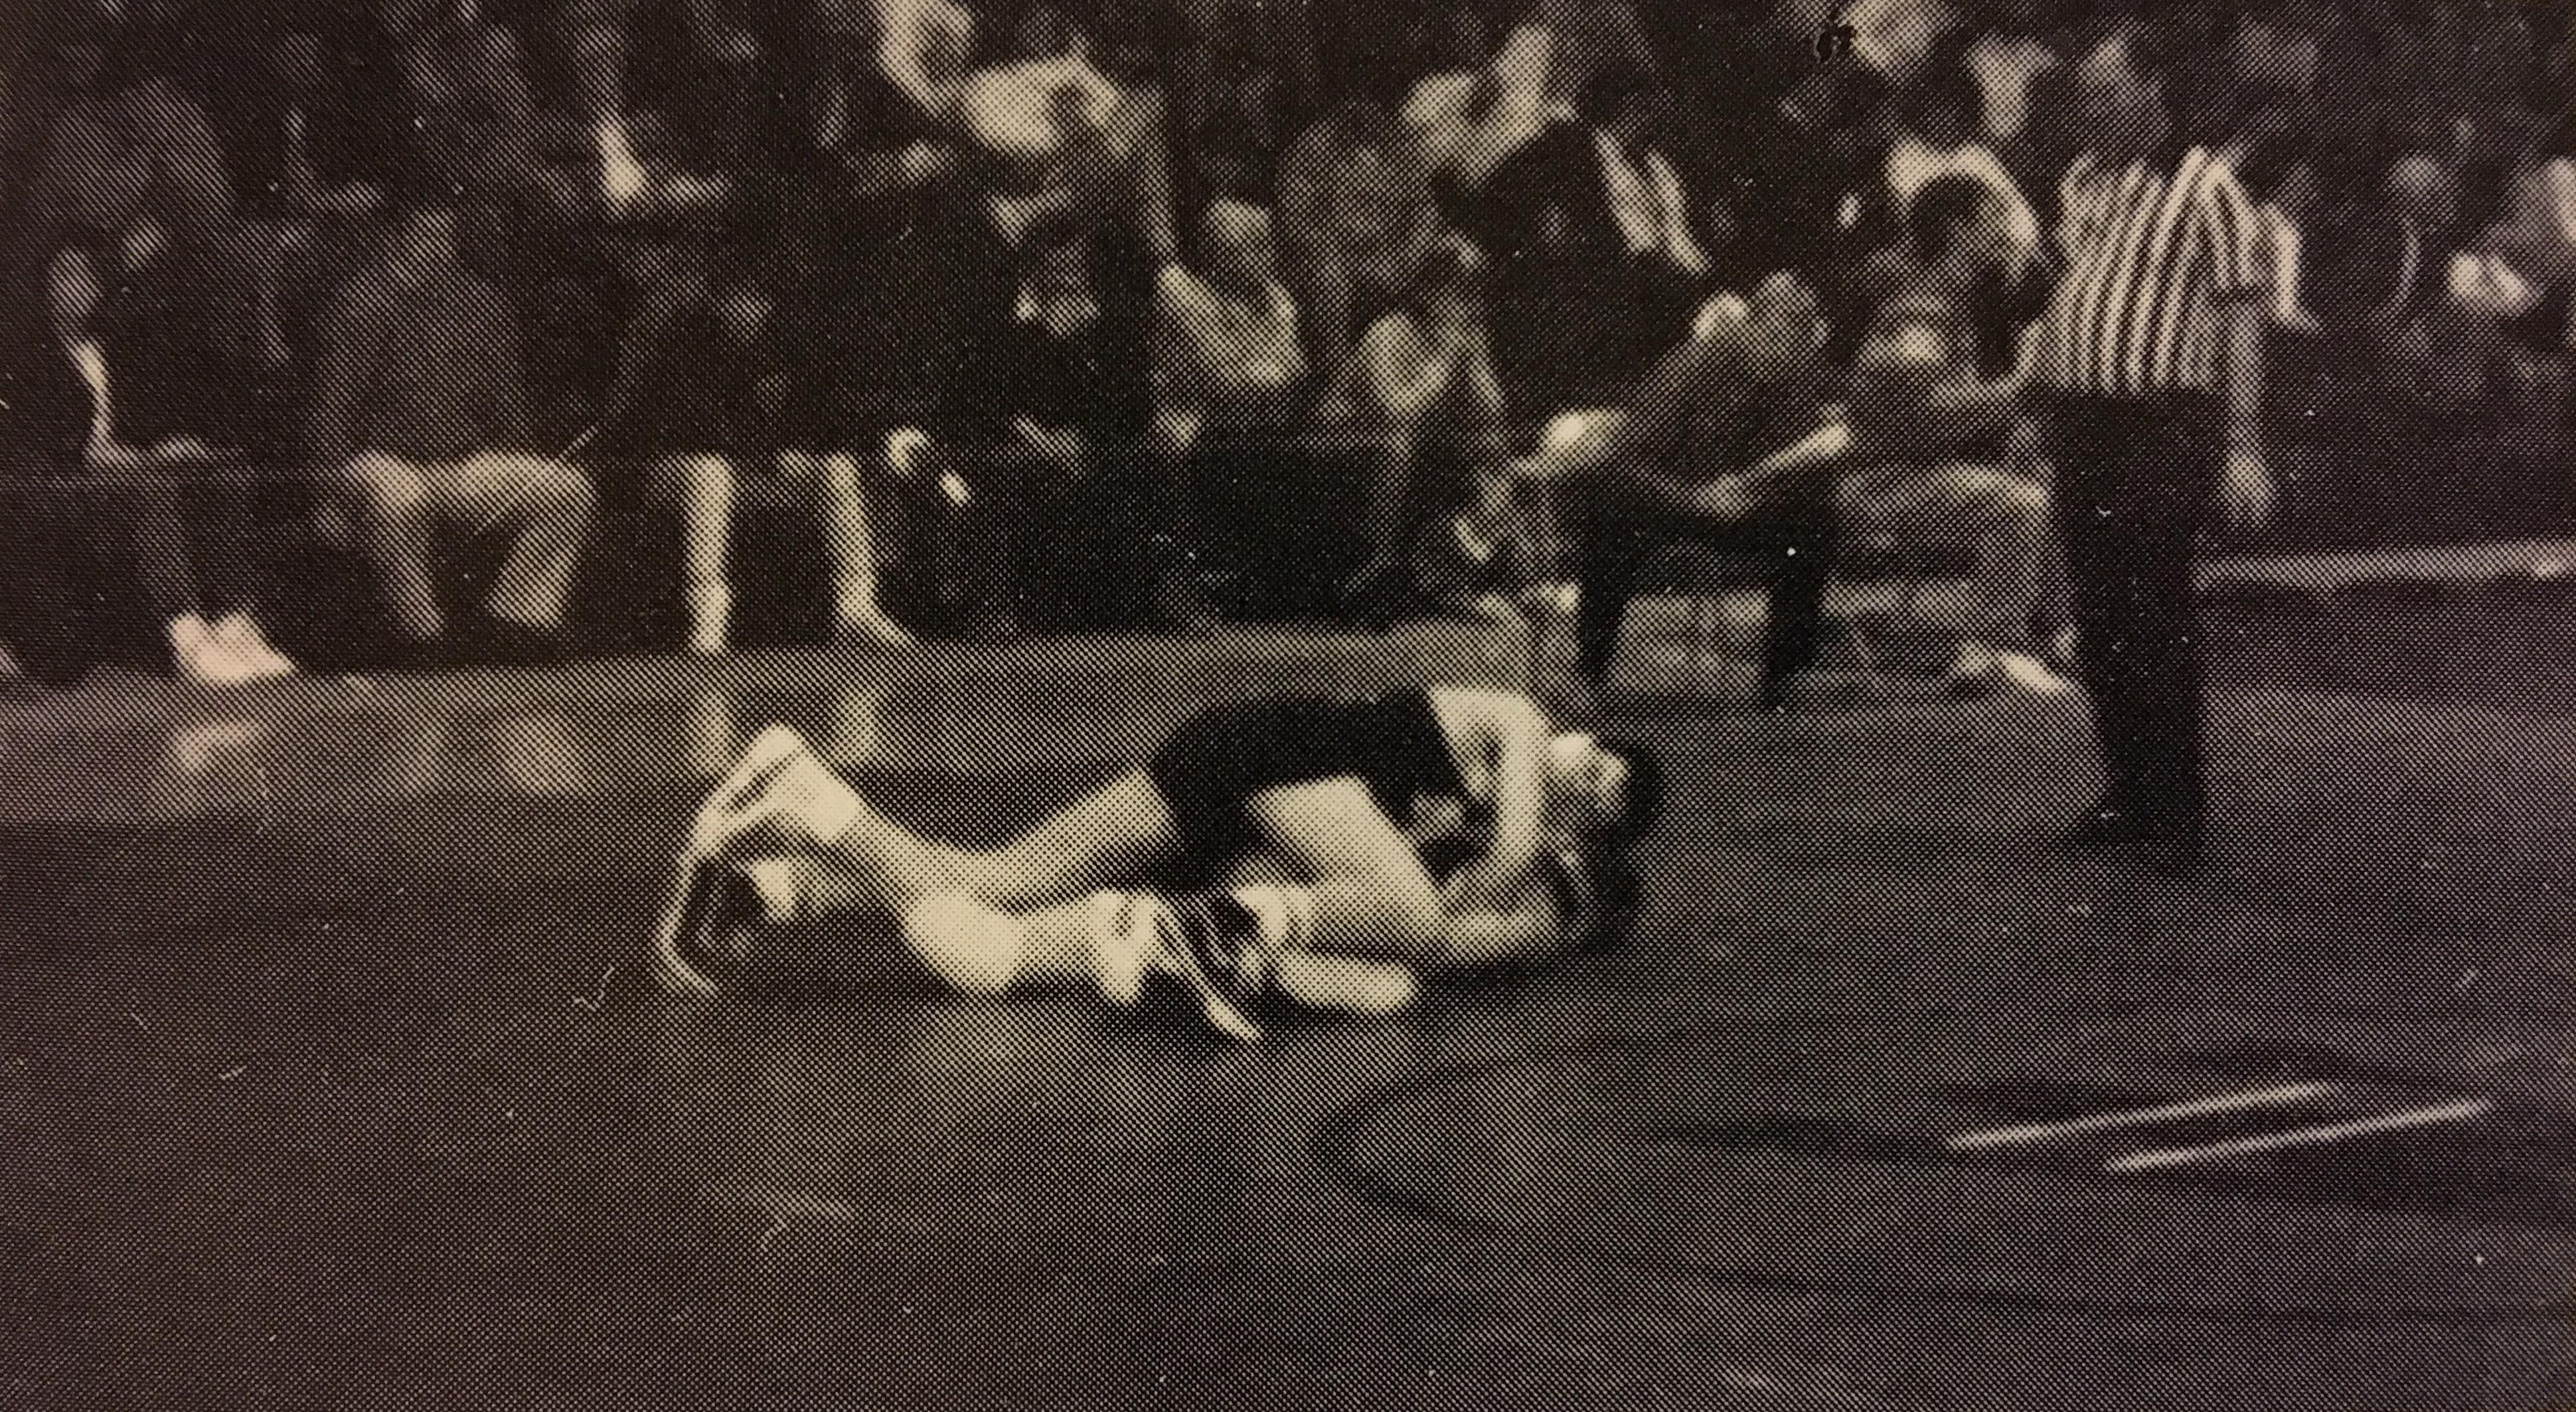 Jim Powell in Control of an Independence Wrestler.